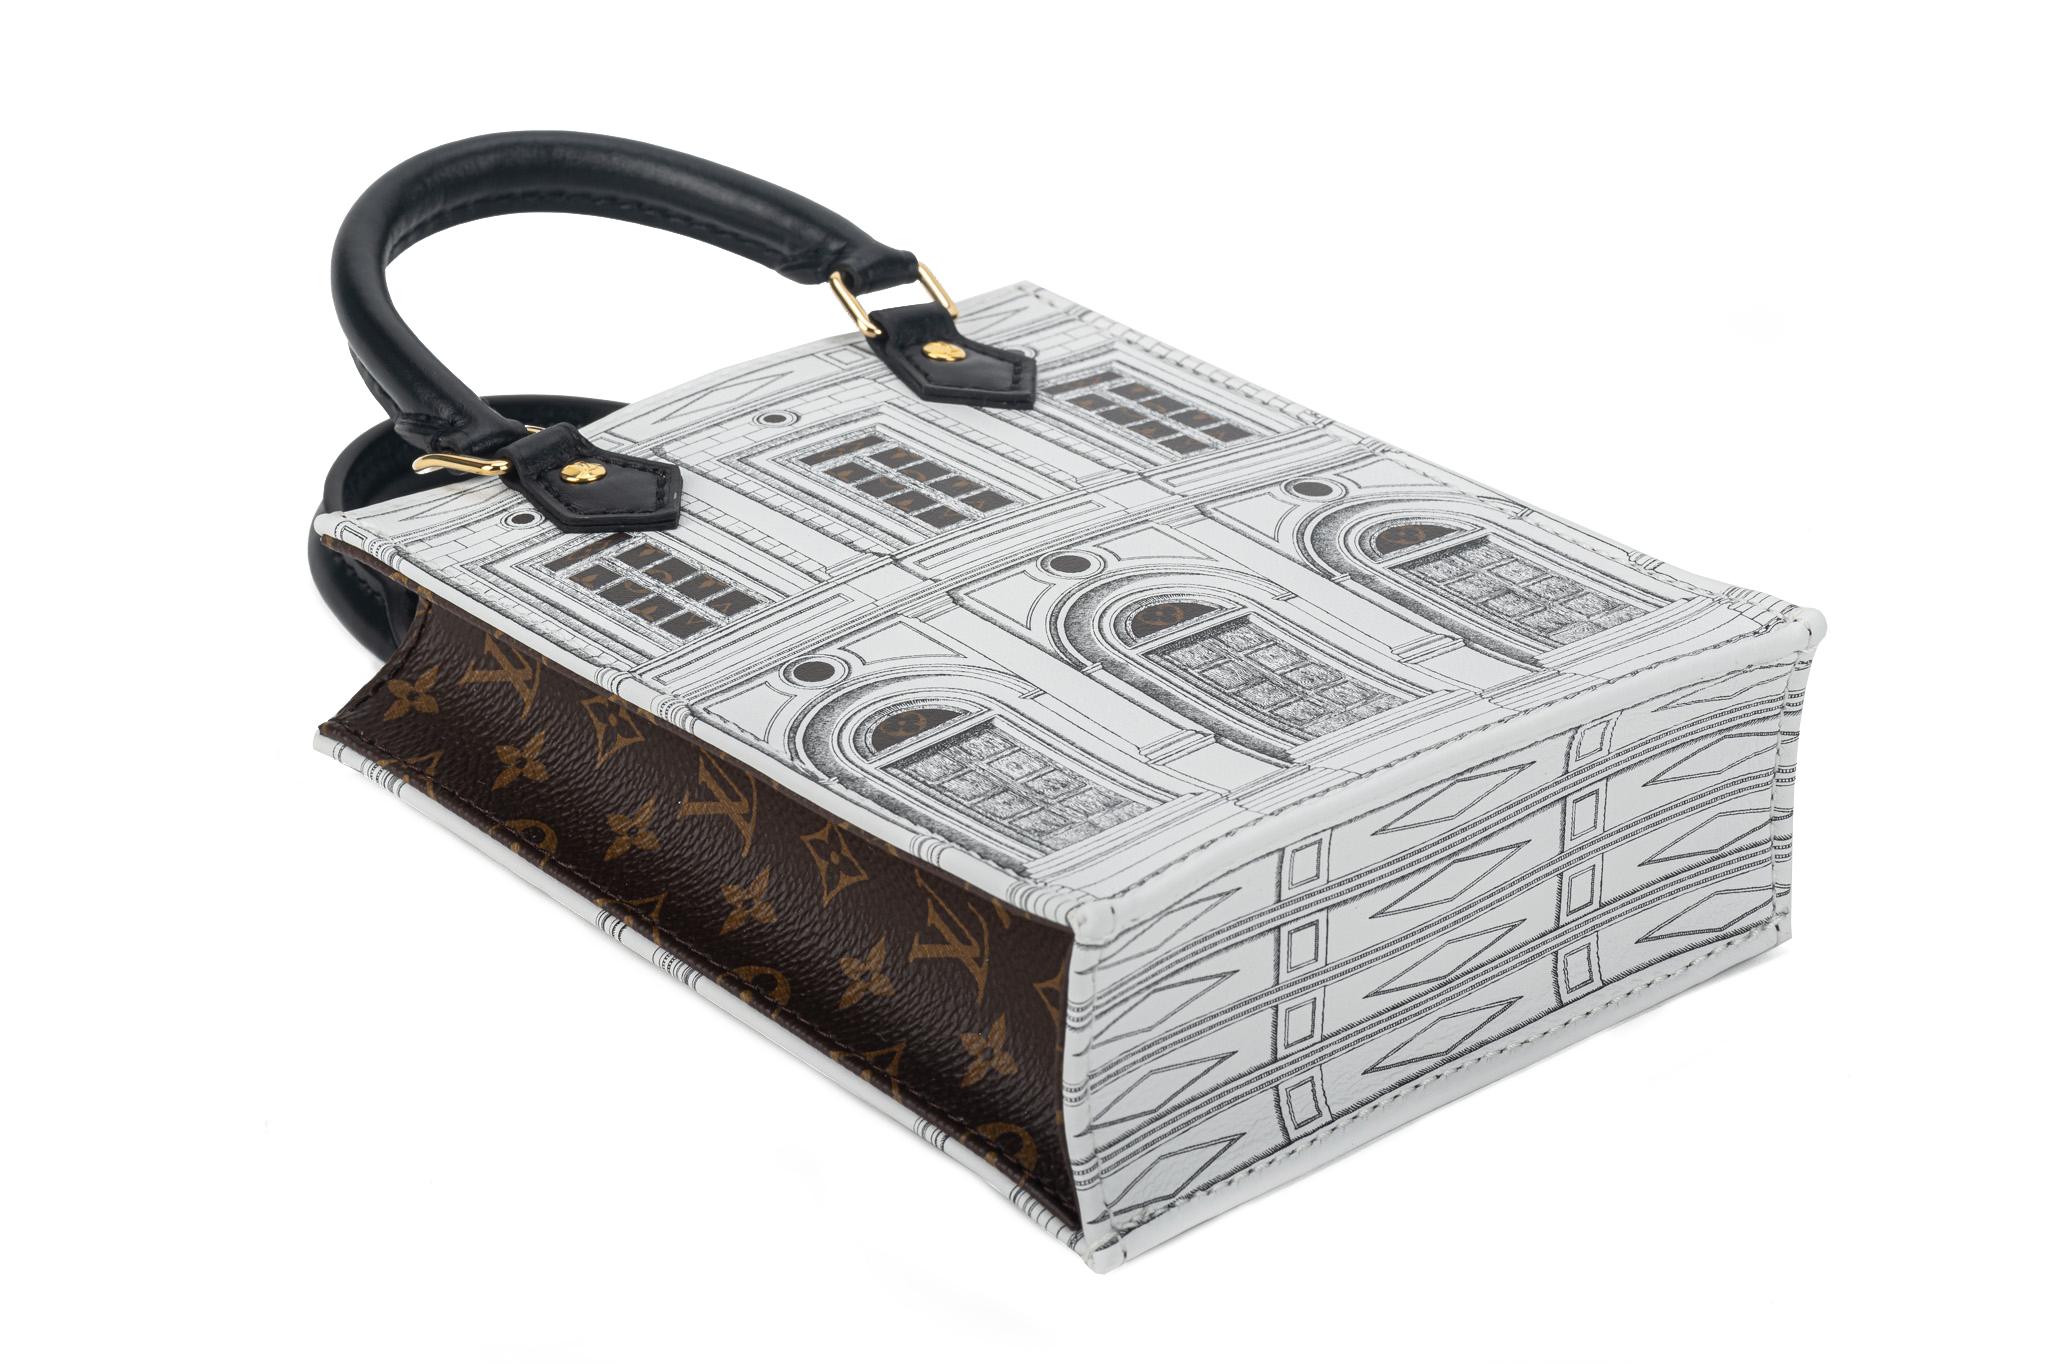 Women's New Louis Vuitton Limited Edition Fornasetti Sac Plat Bag